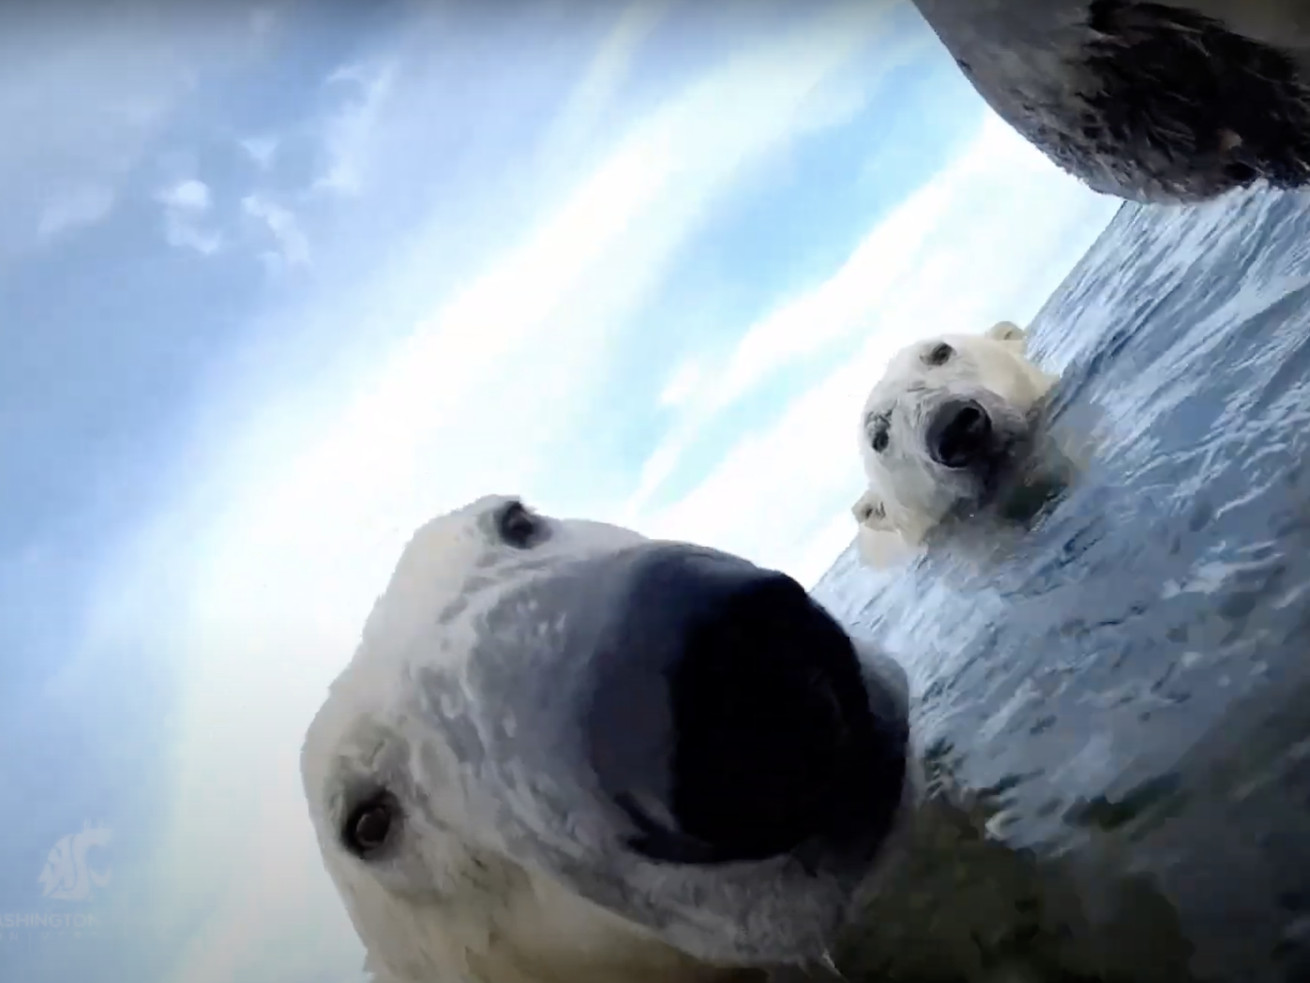 Two polar bears swimming with just their heads above water.